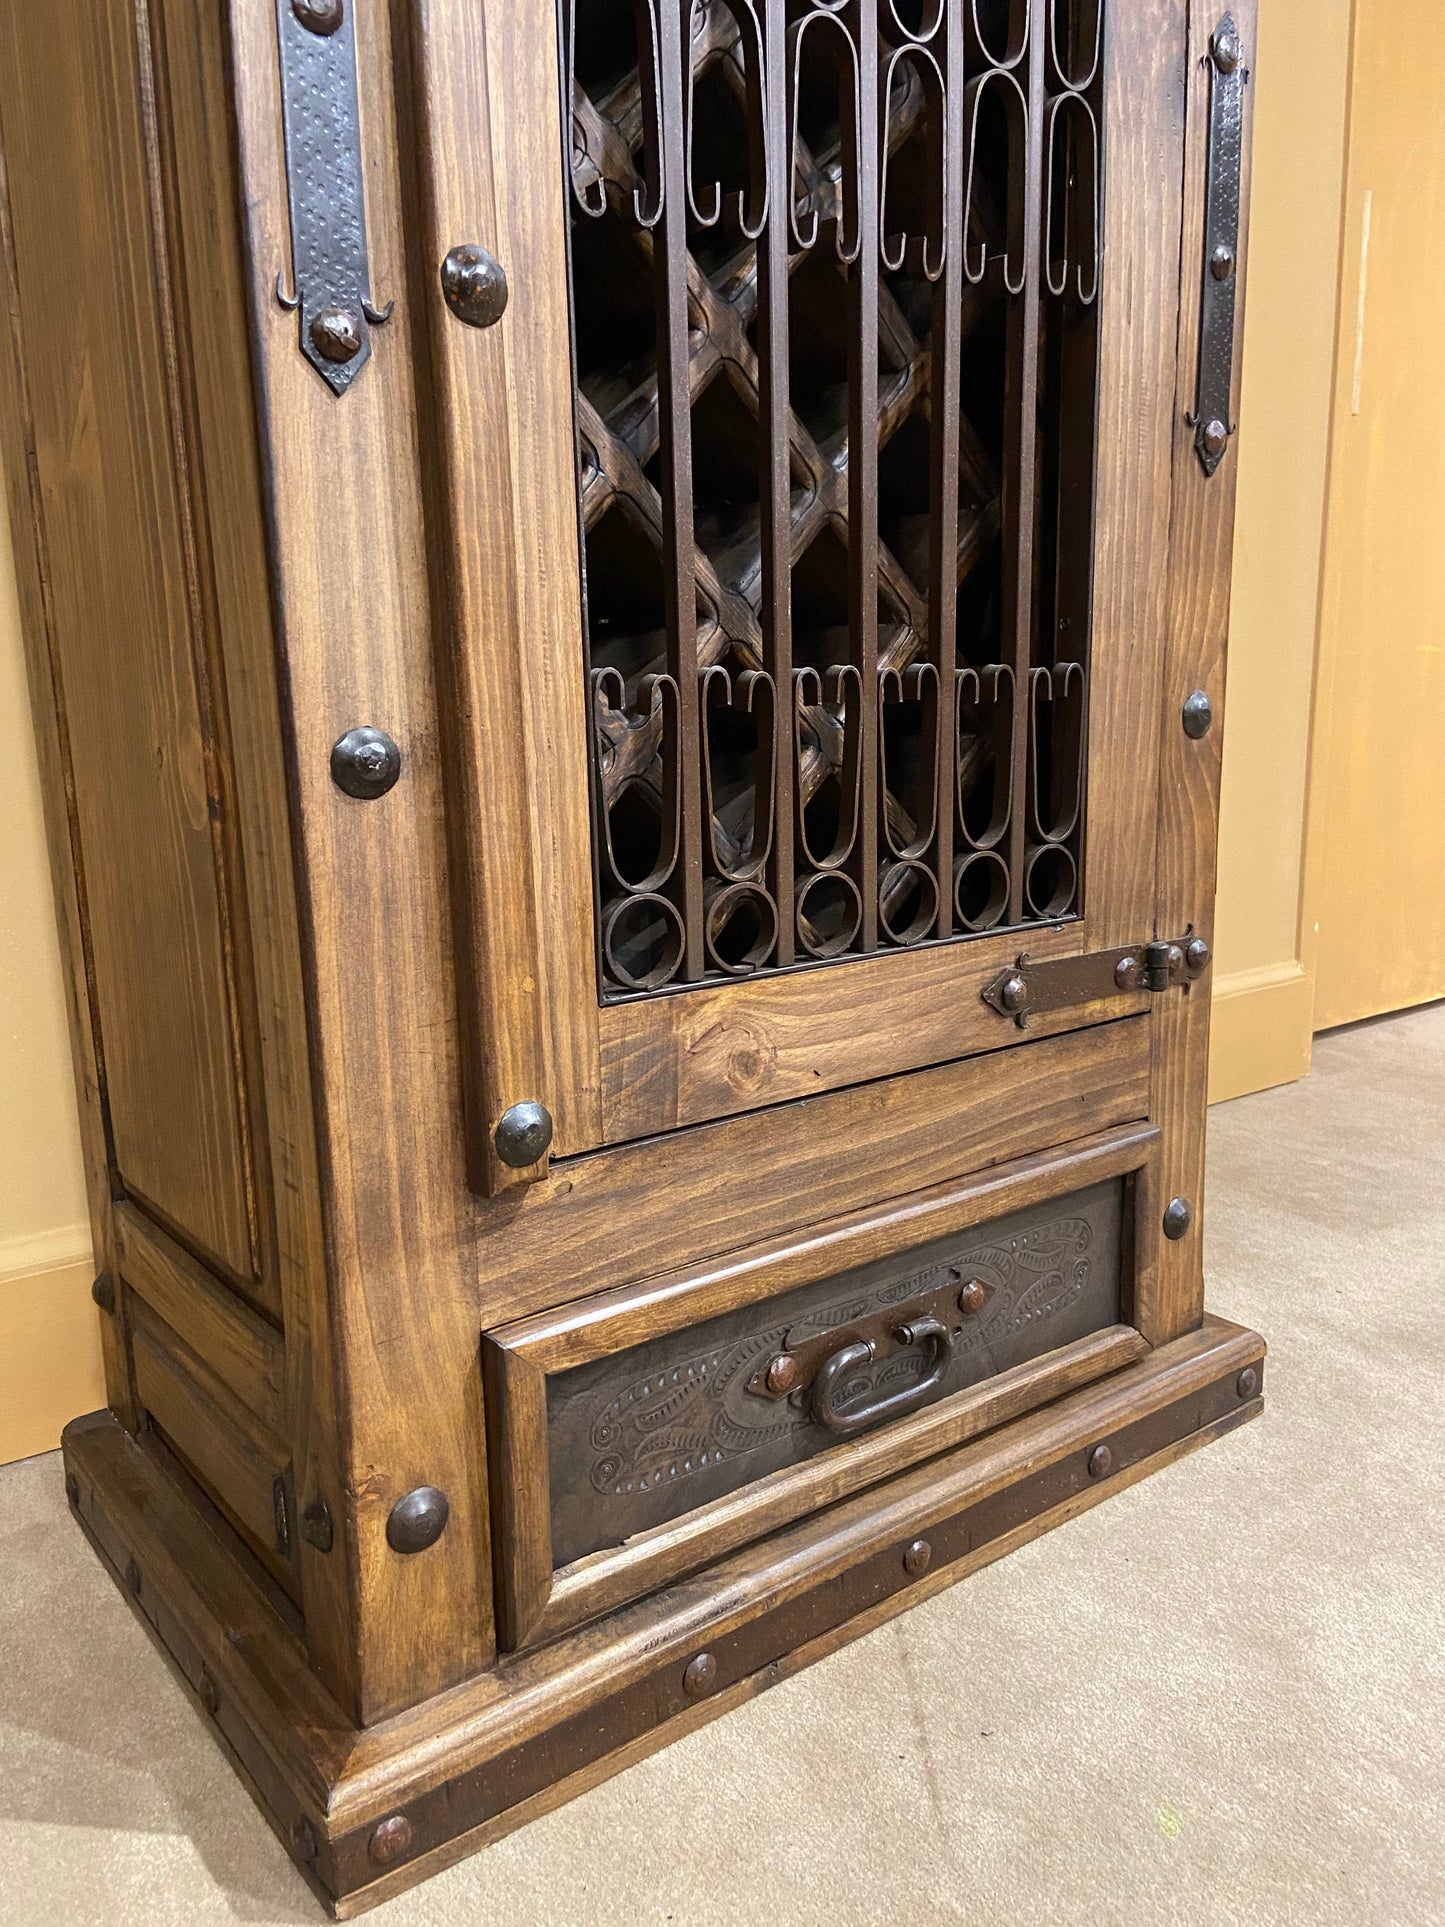 Bottom of wine cabinet showing hand forged steel elements and hand tooled leather on drawer